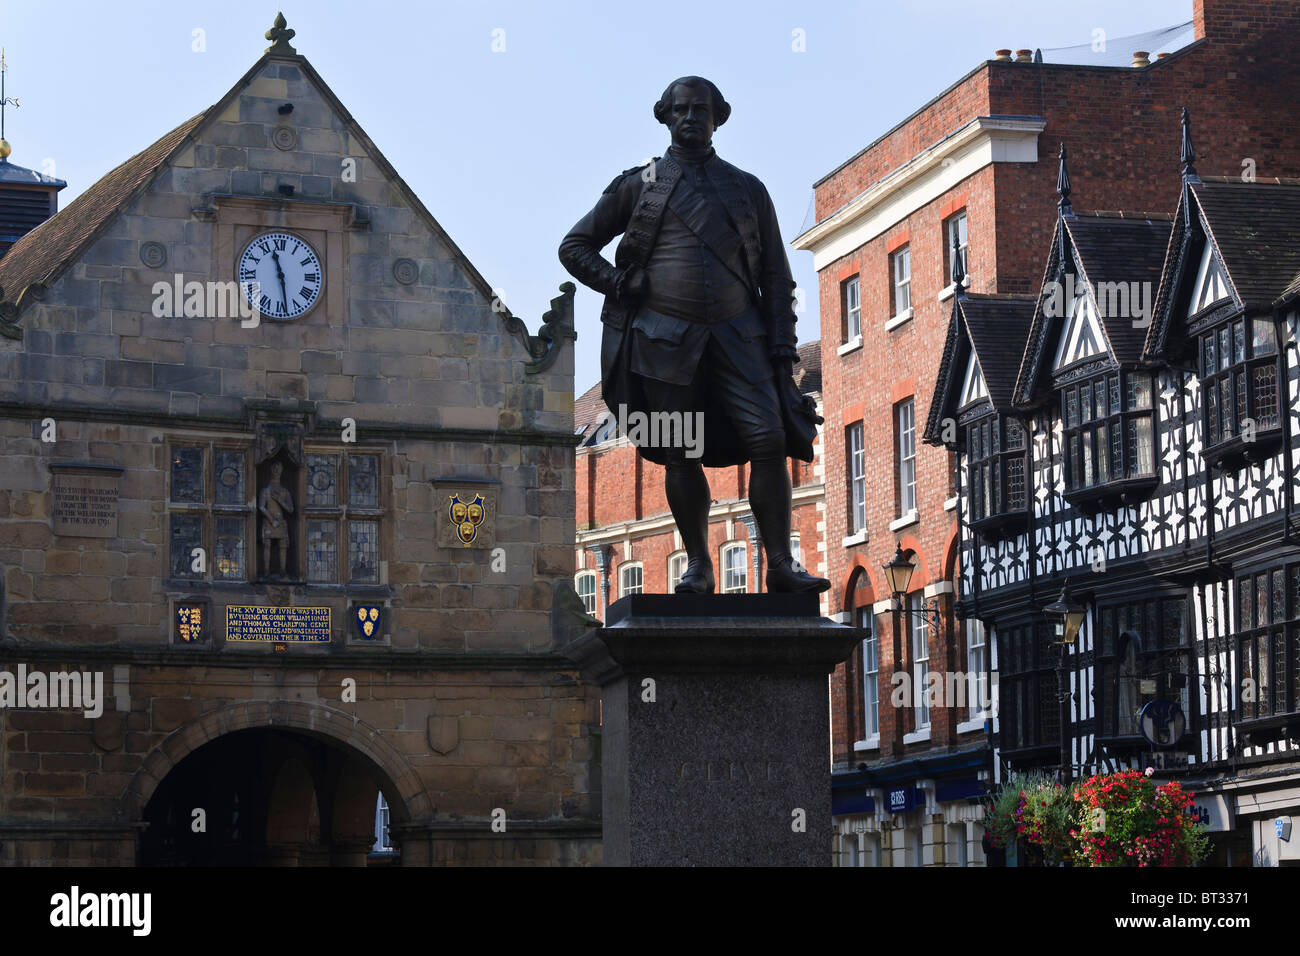 Shrewsbury market square featuring the 16th century market hall and statue of Clive of India. Stock Photo